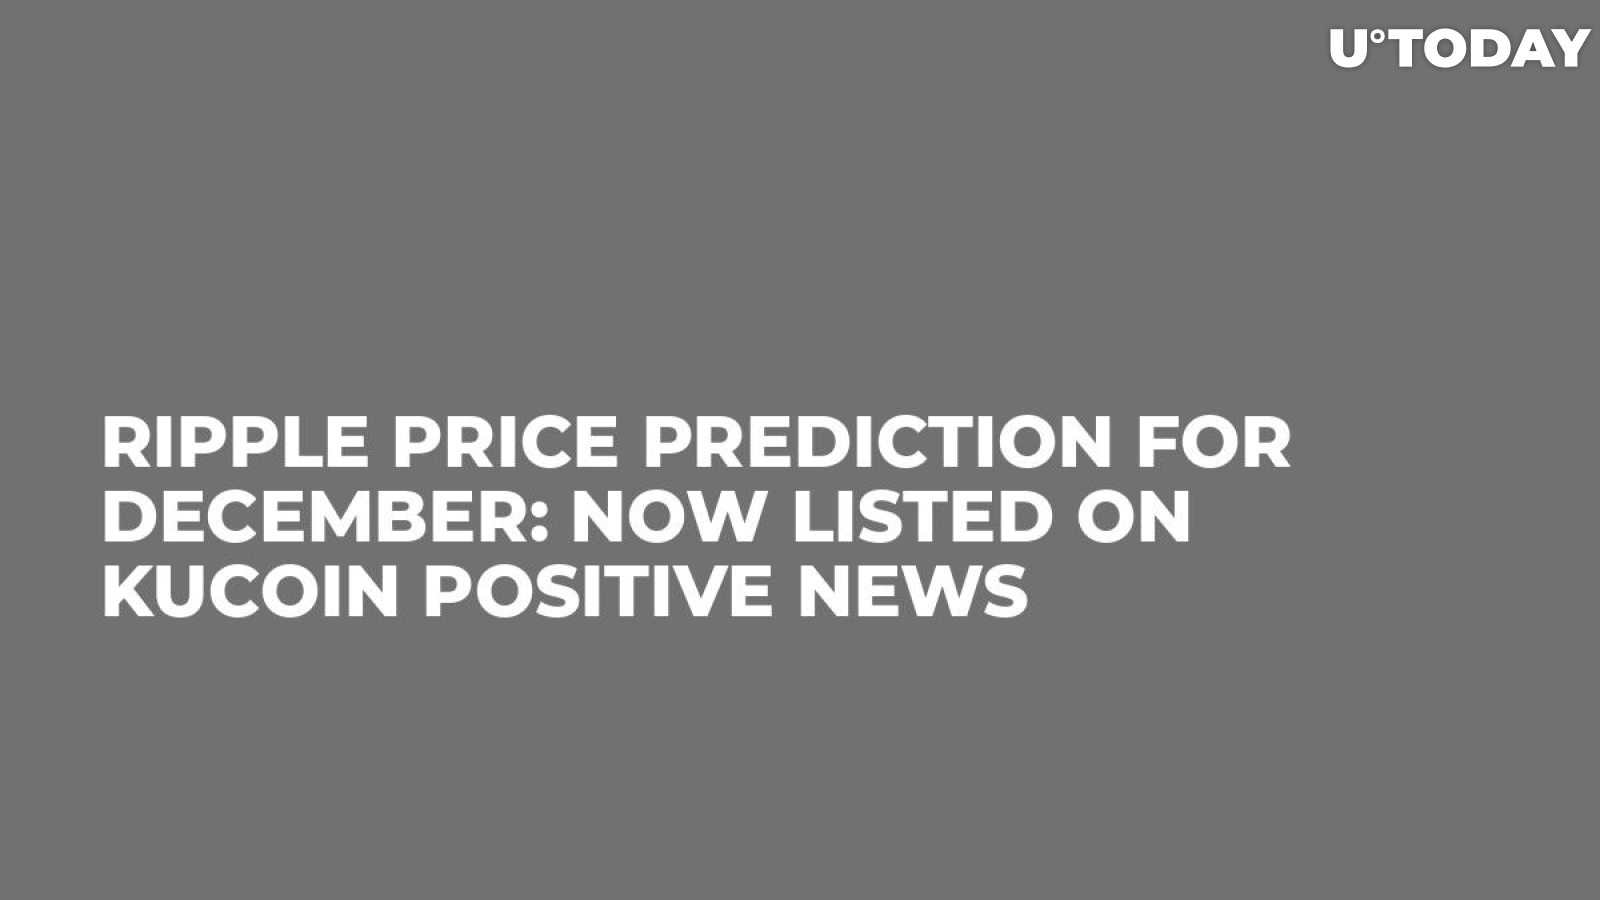 Ripple Price Prediction for December: Now Listed on KuCoin Positive News